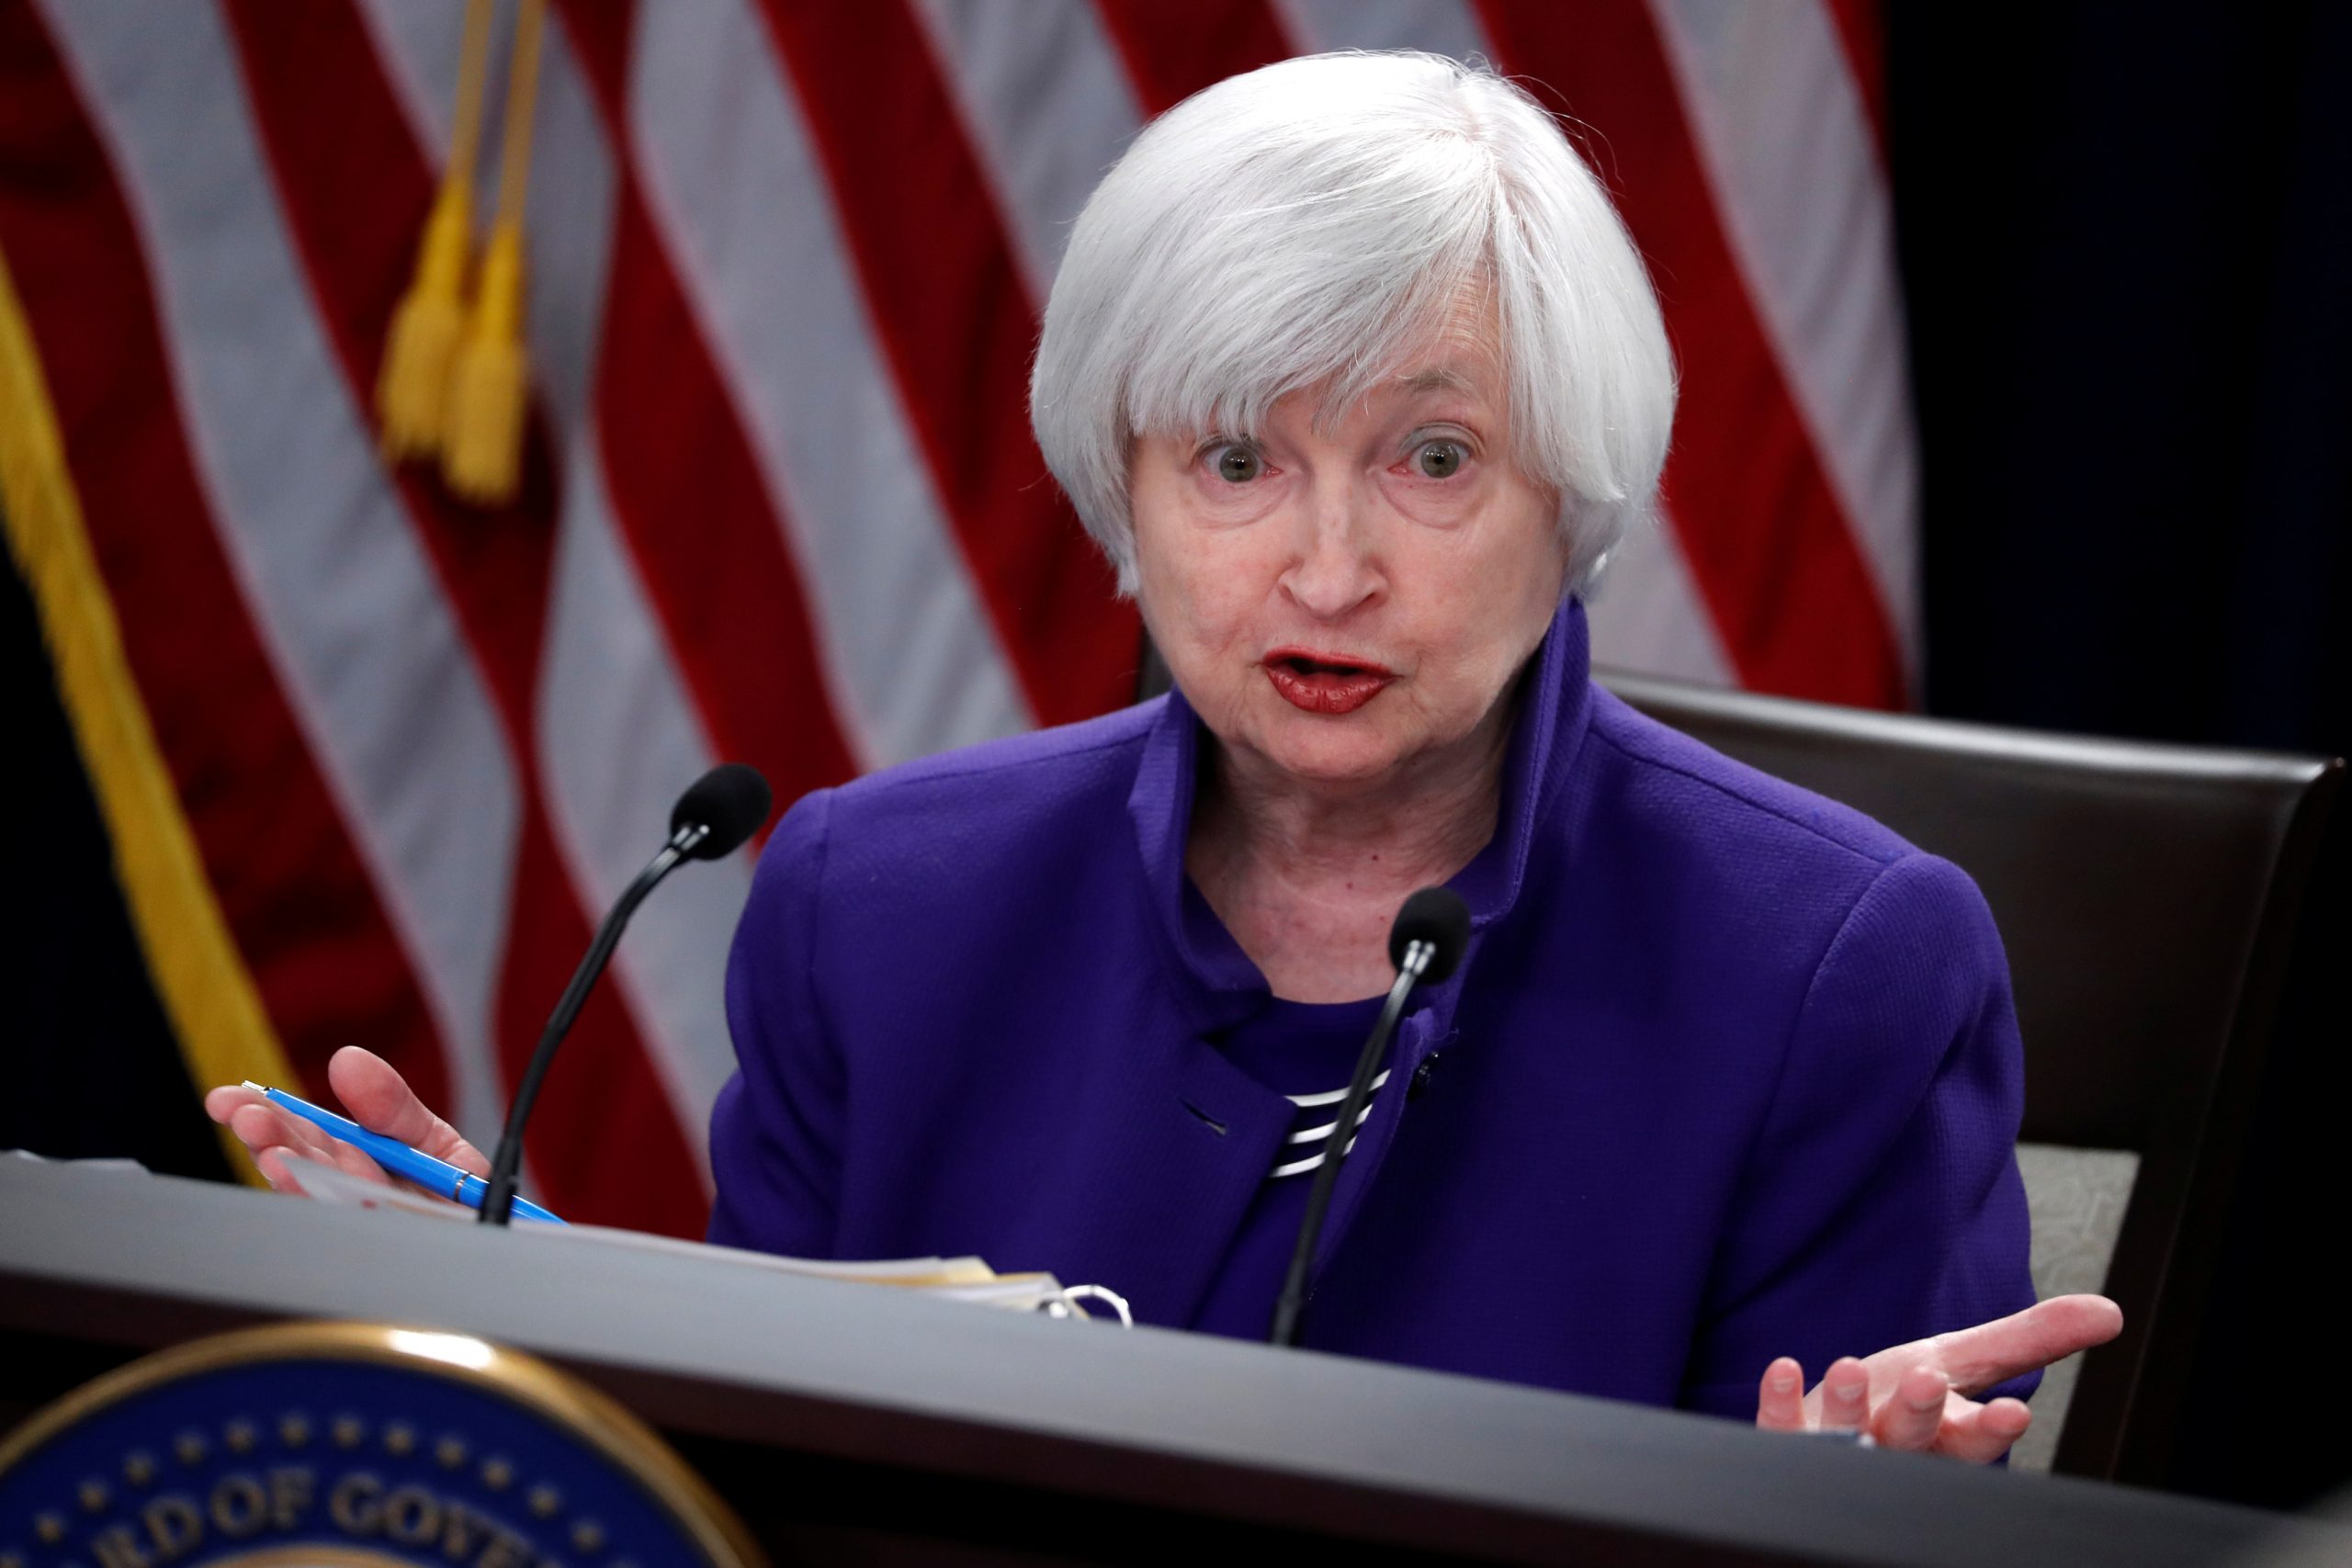 Yellen Pushes Minimum Corporate Taxes, Ending Fossil Fuel Breaks, To Pay for Infrastructure